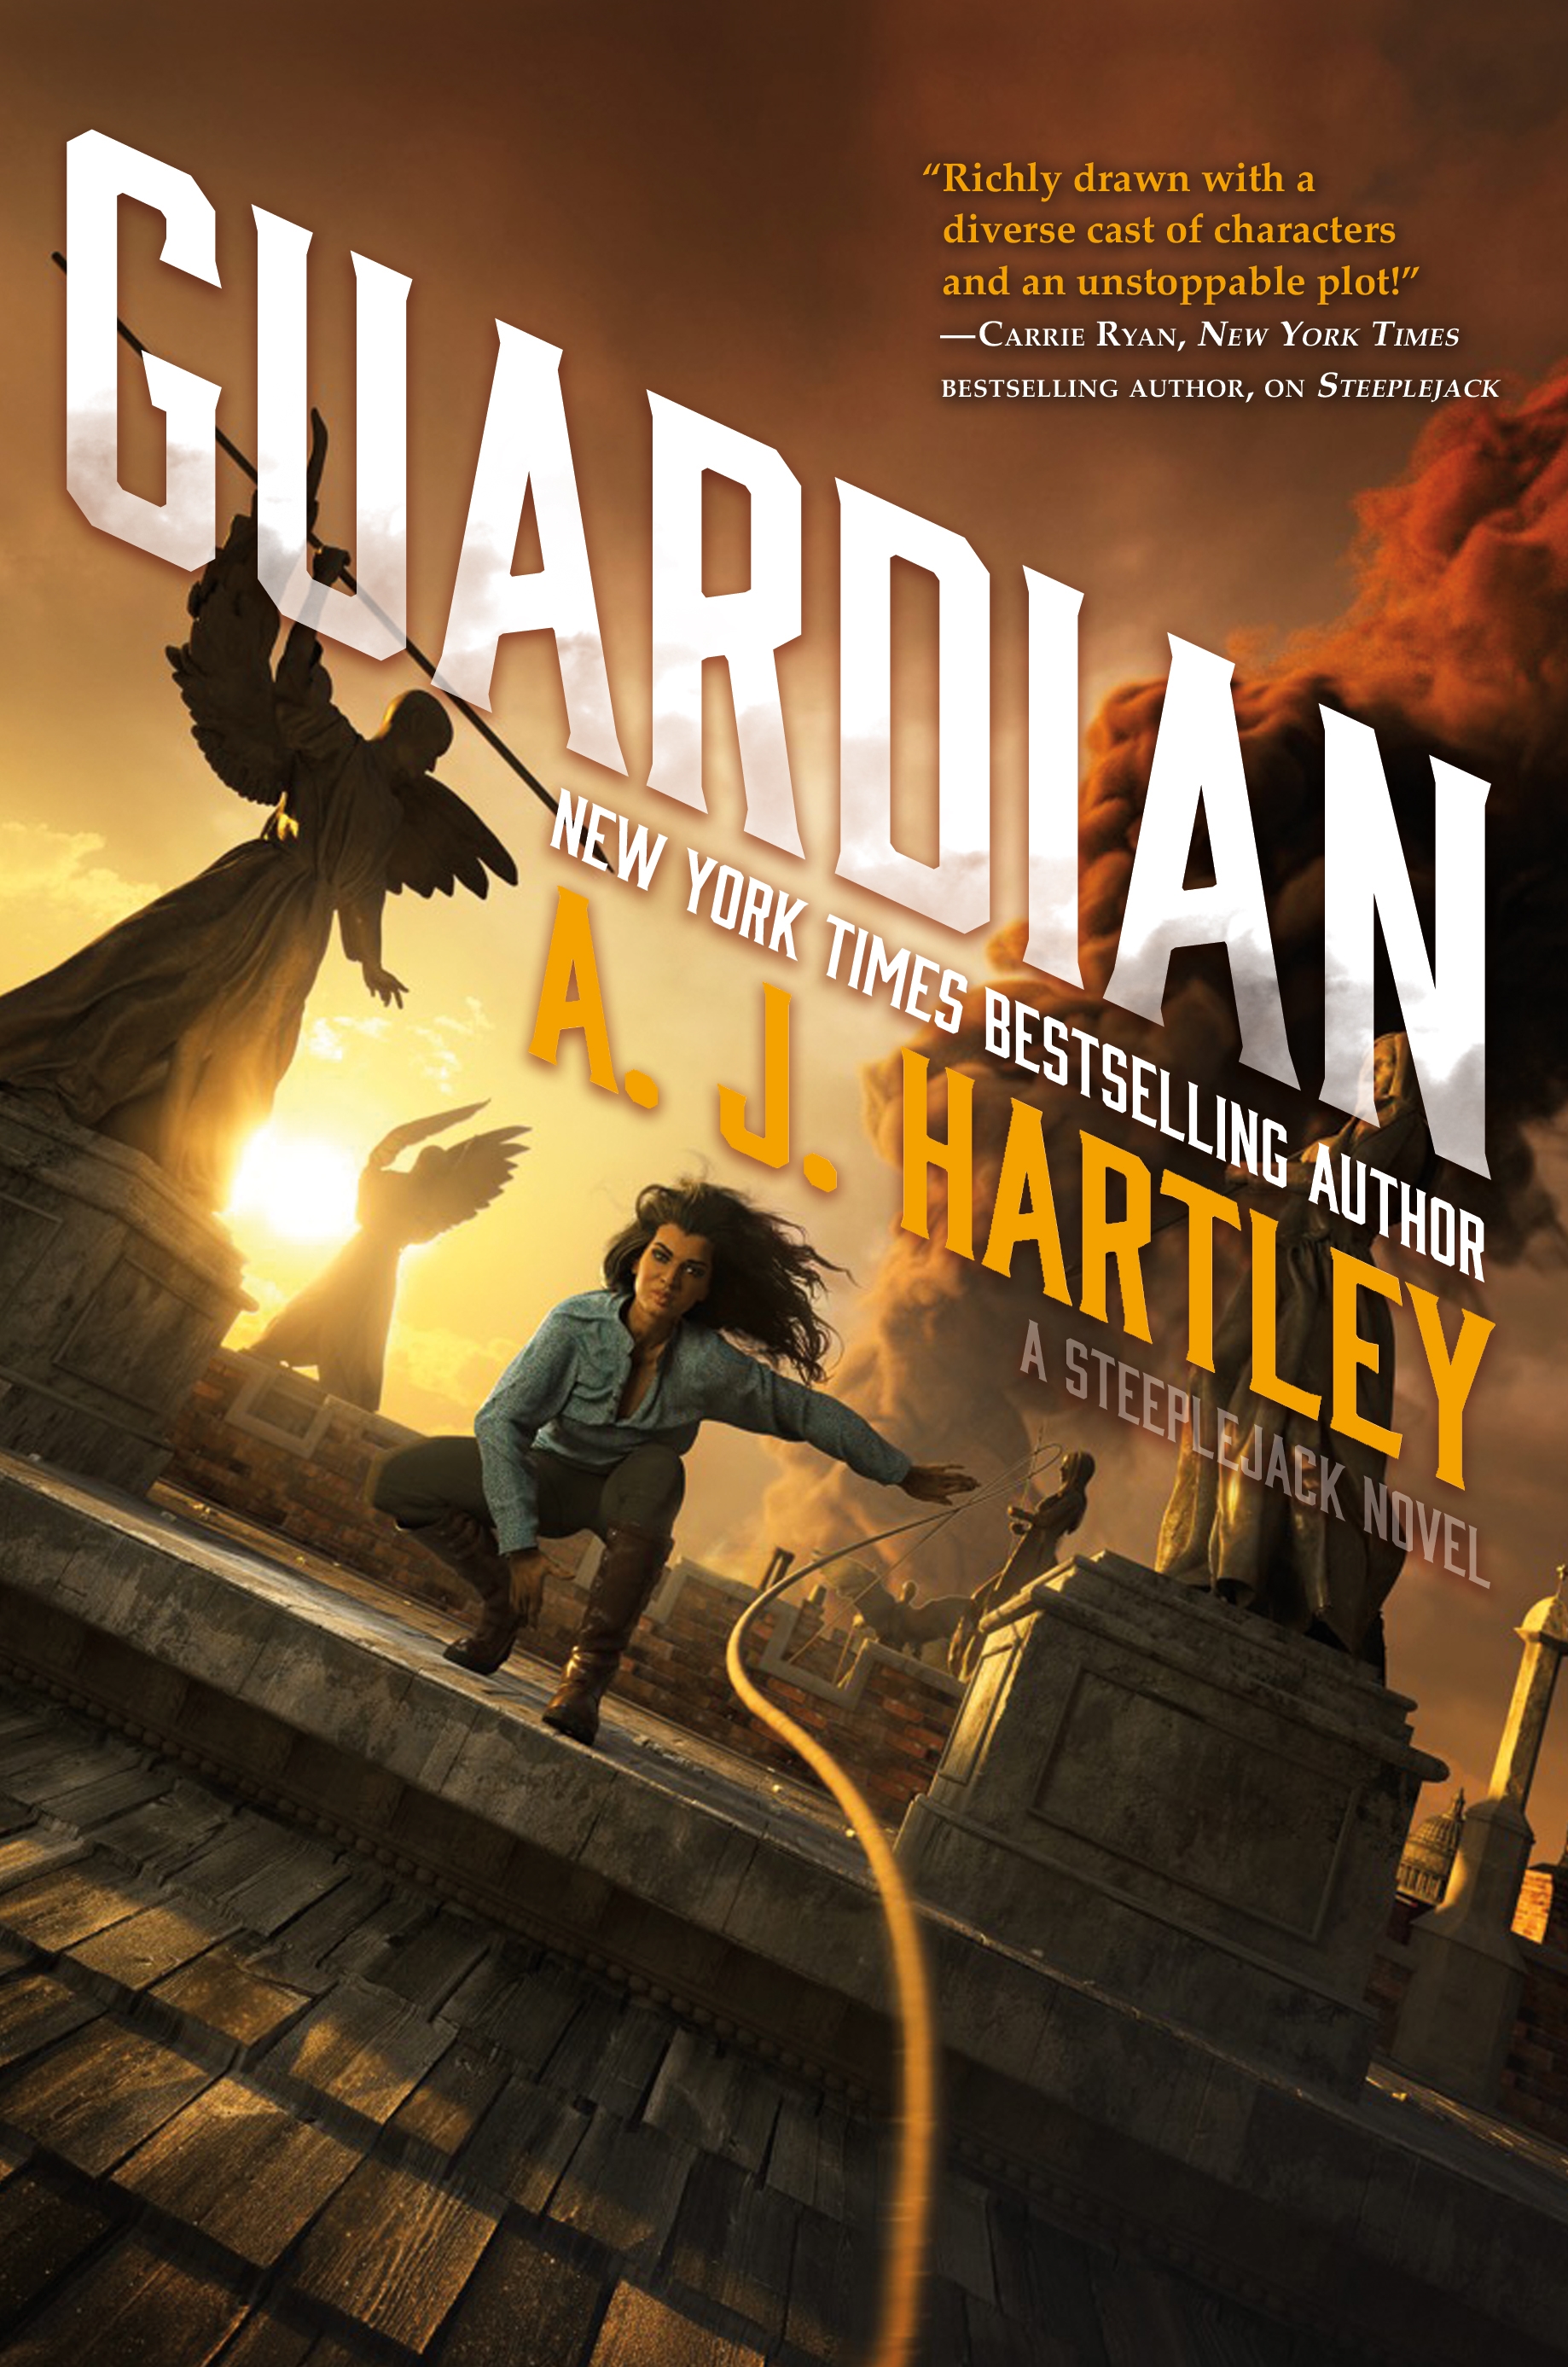 Guardian : Book 3 in the Steeplejack series by A. J. Hartley